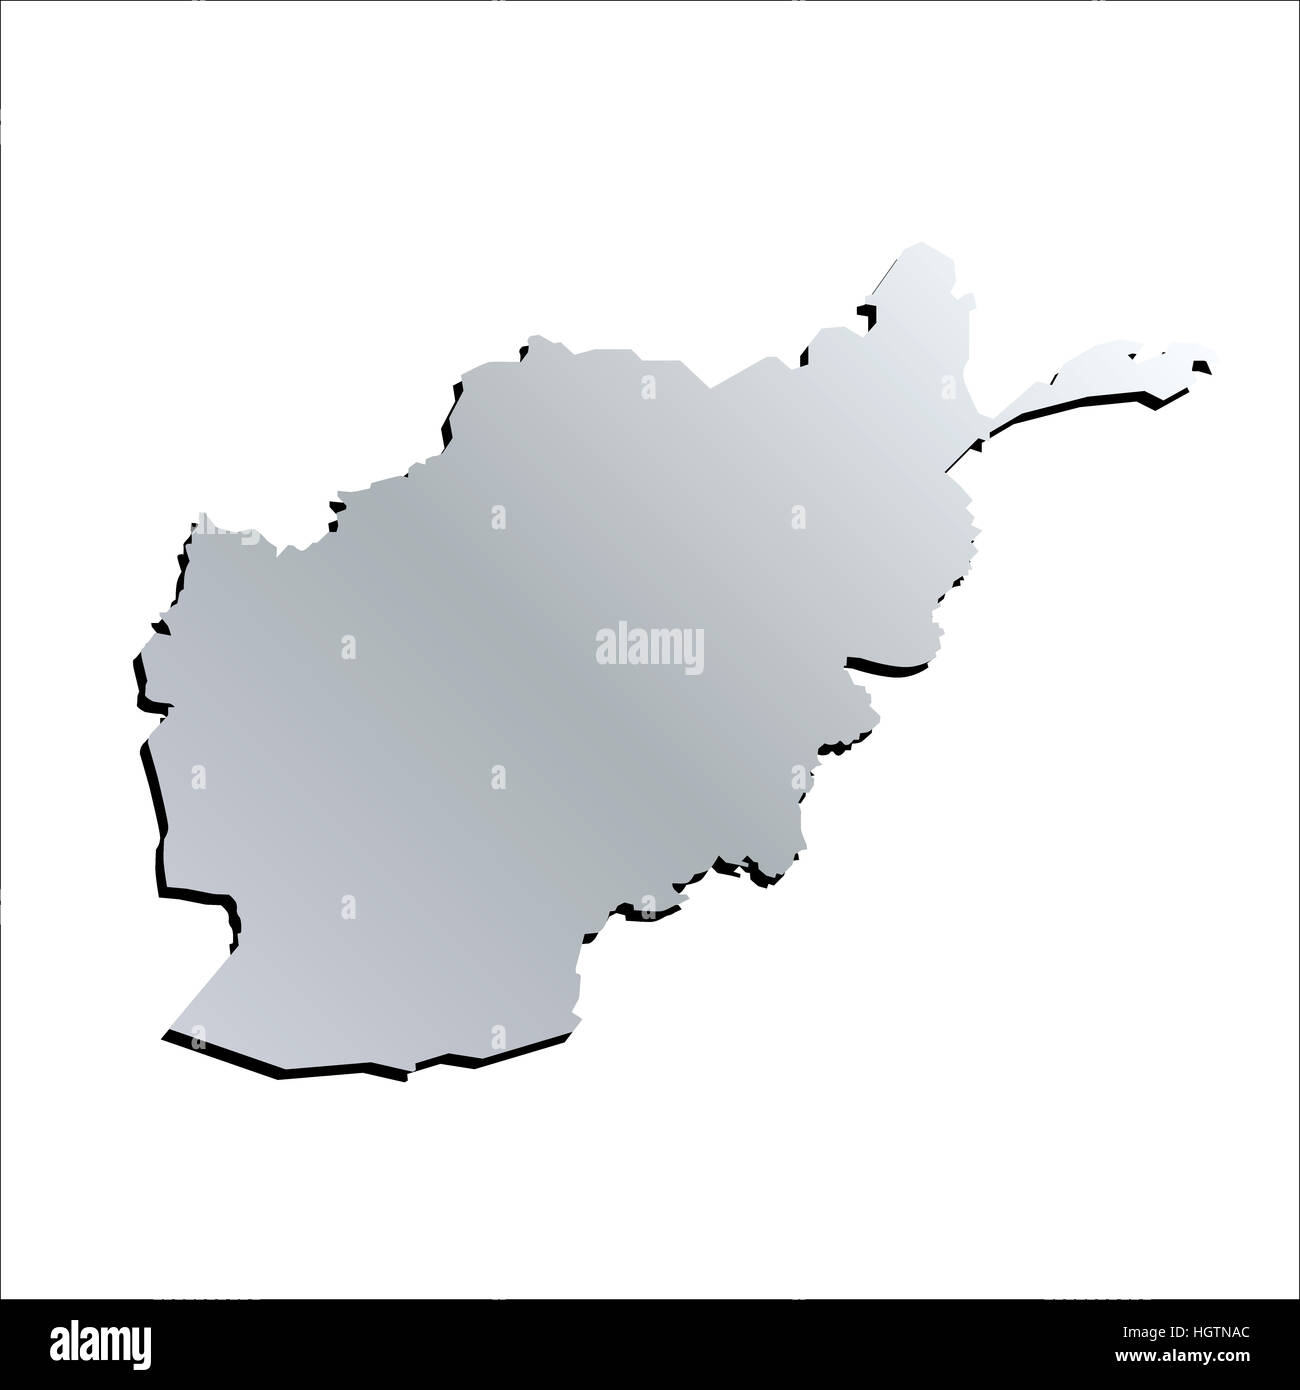 3D Vector Afghanistan Silver Outline Mercator Map Stock Photo